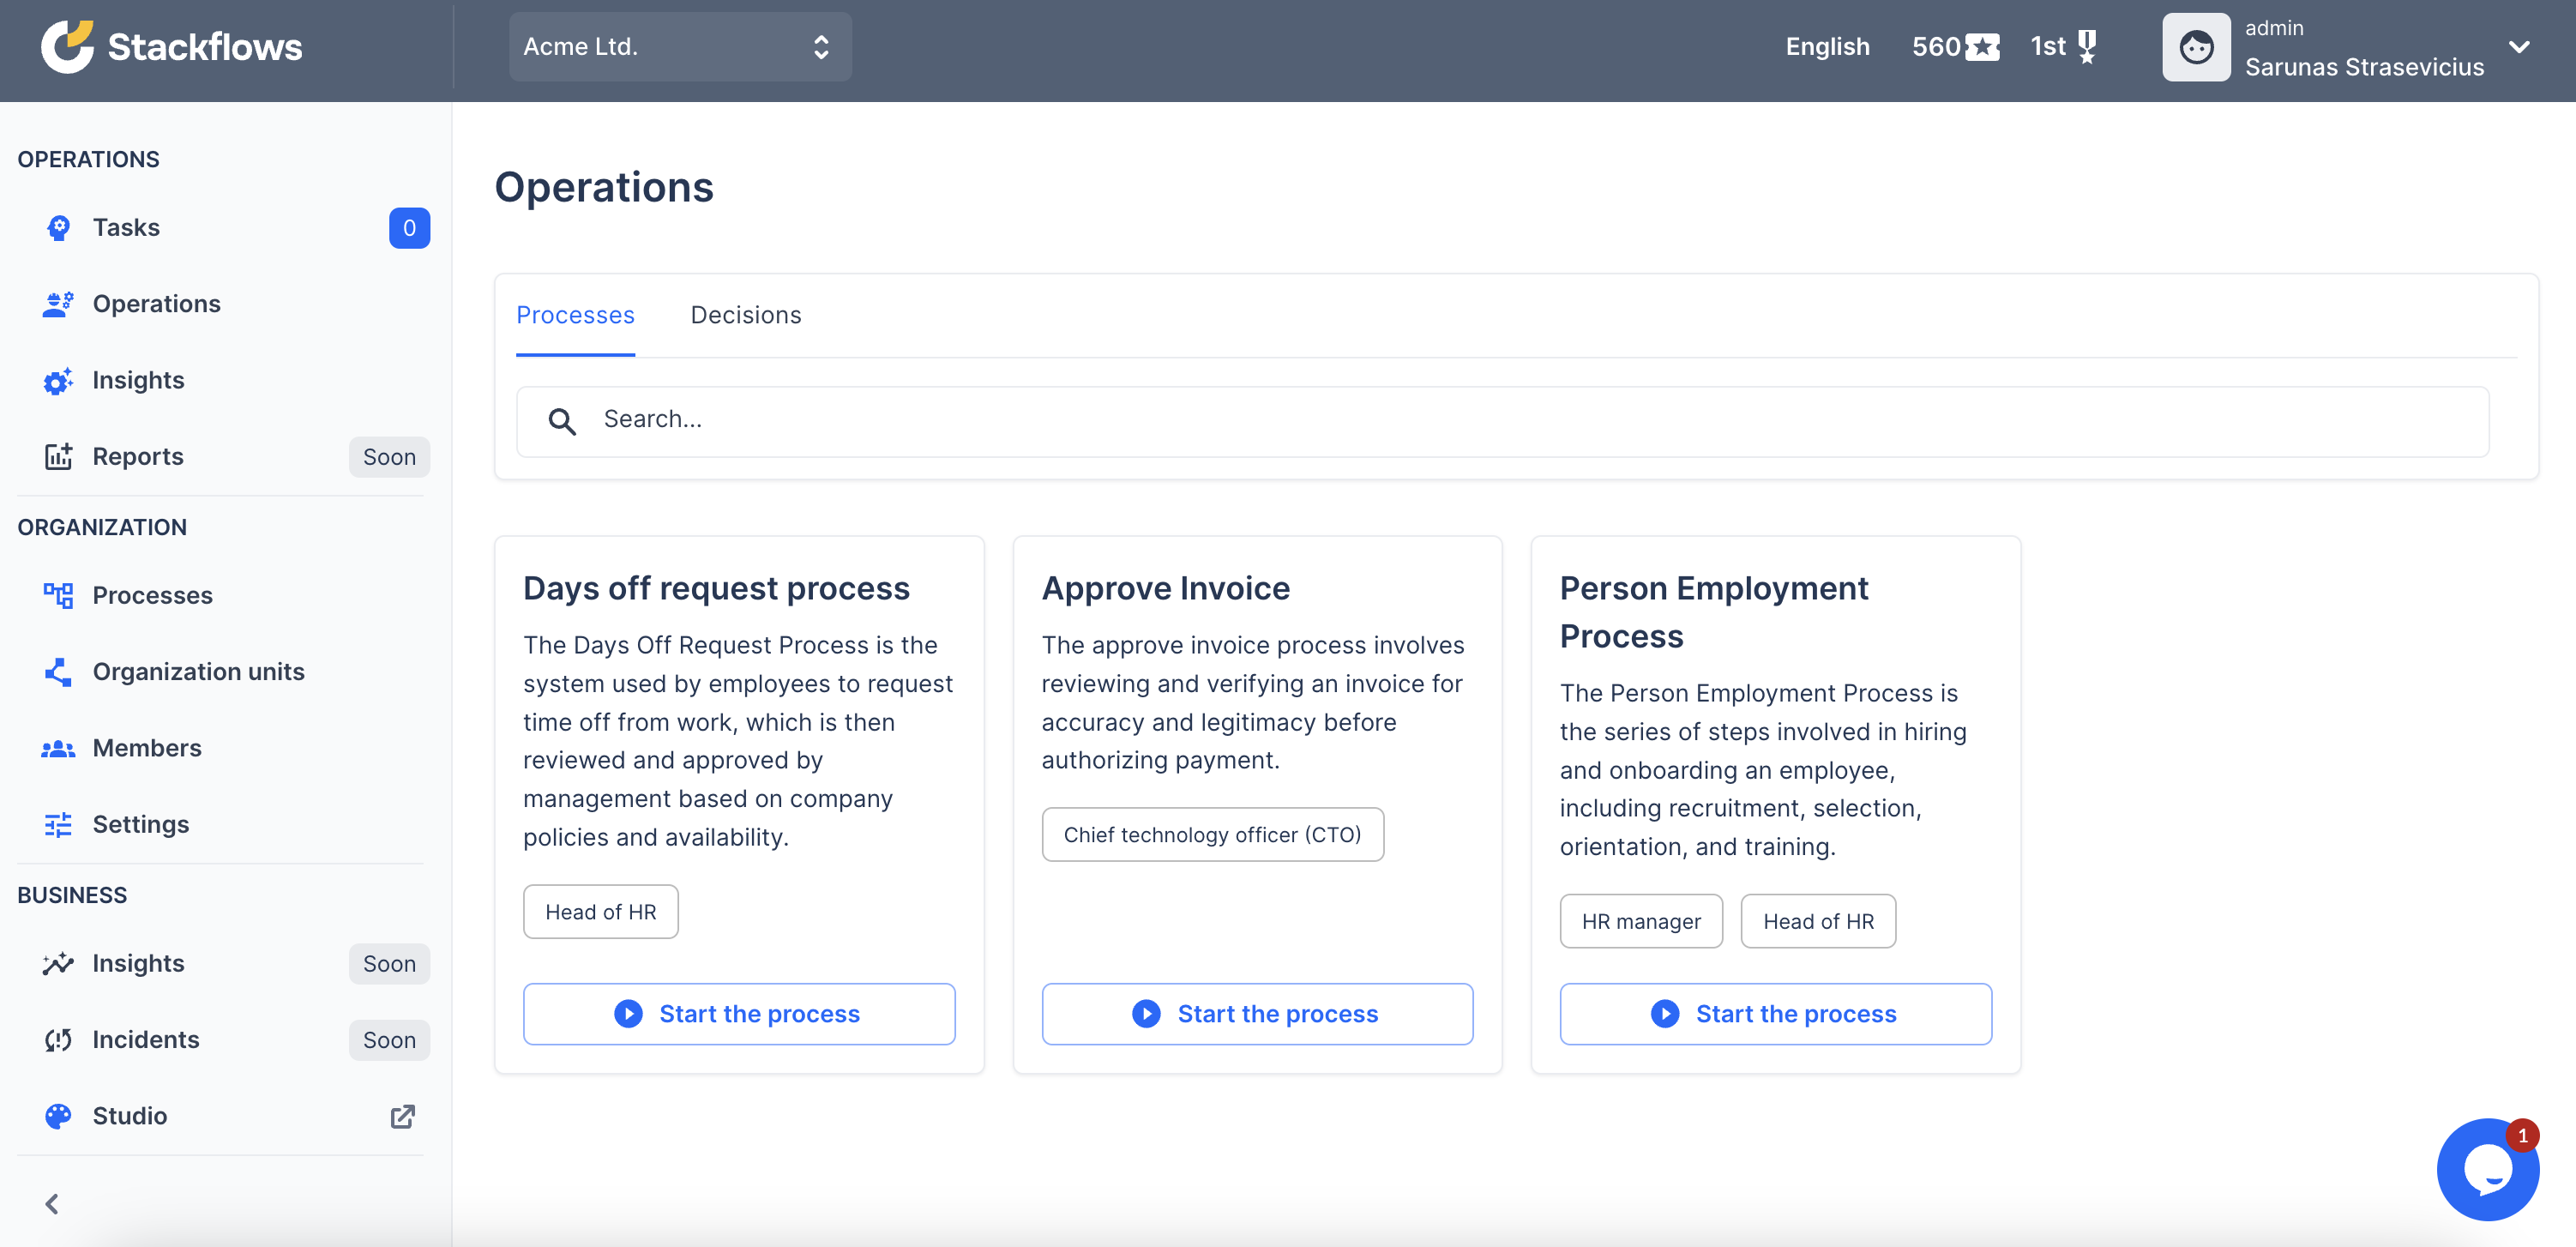 Pre-build operations for employees to start a process